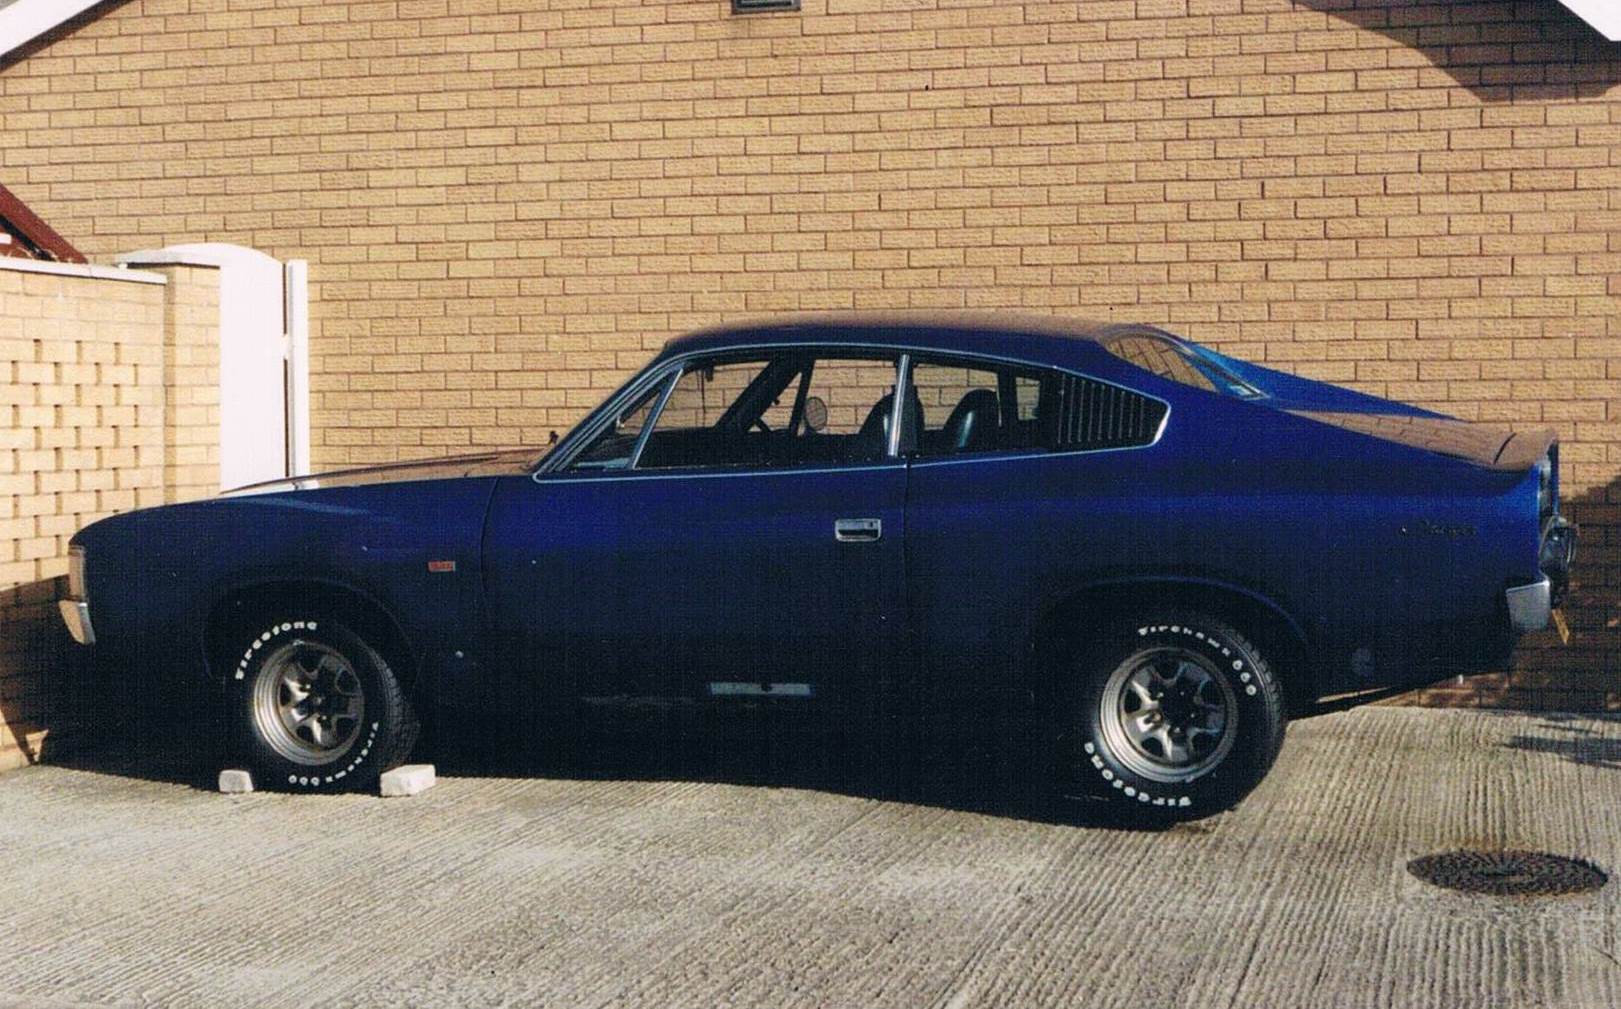 Charger 06.jpg